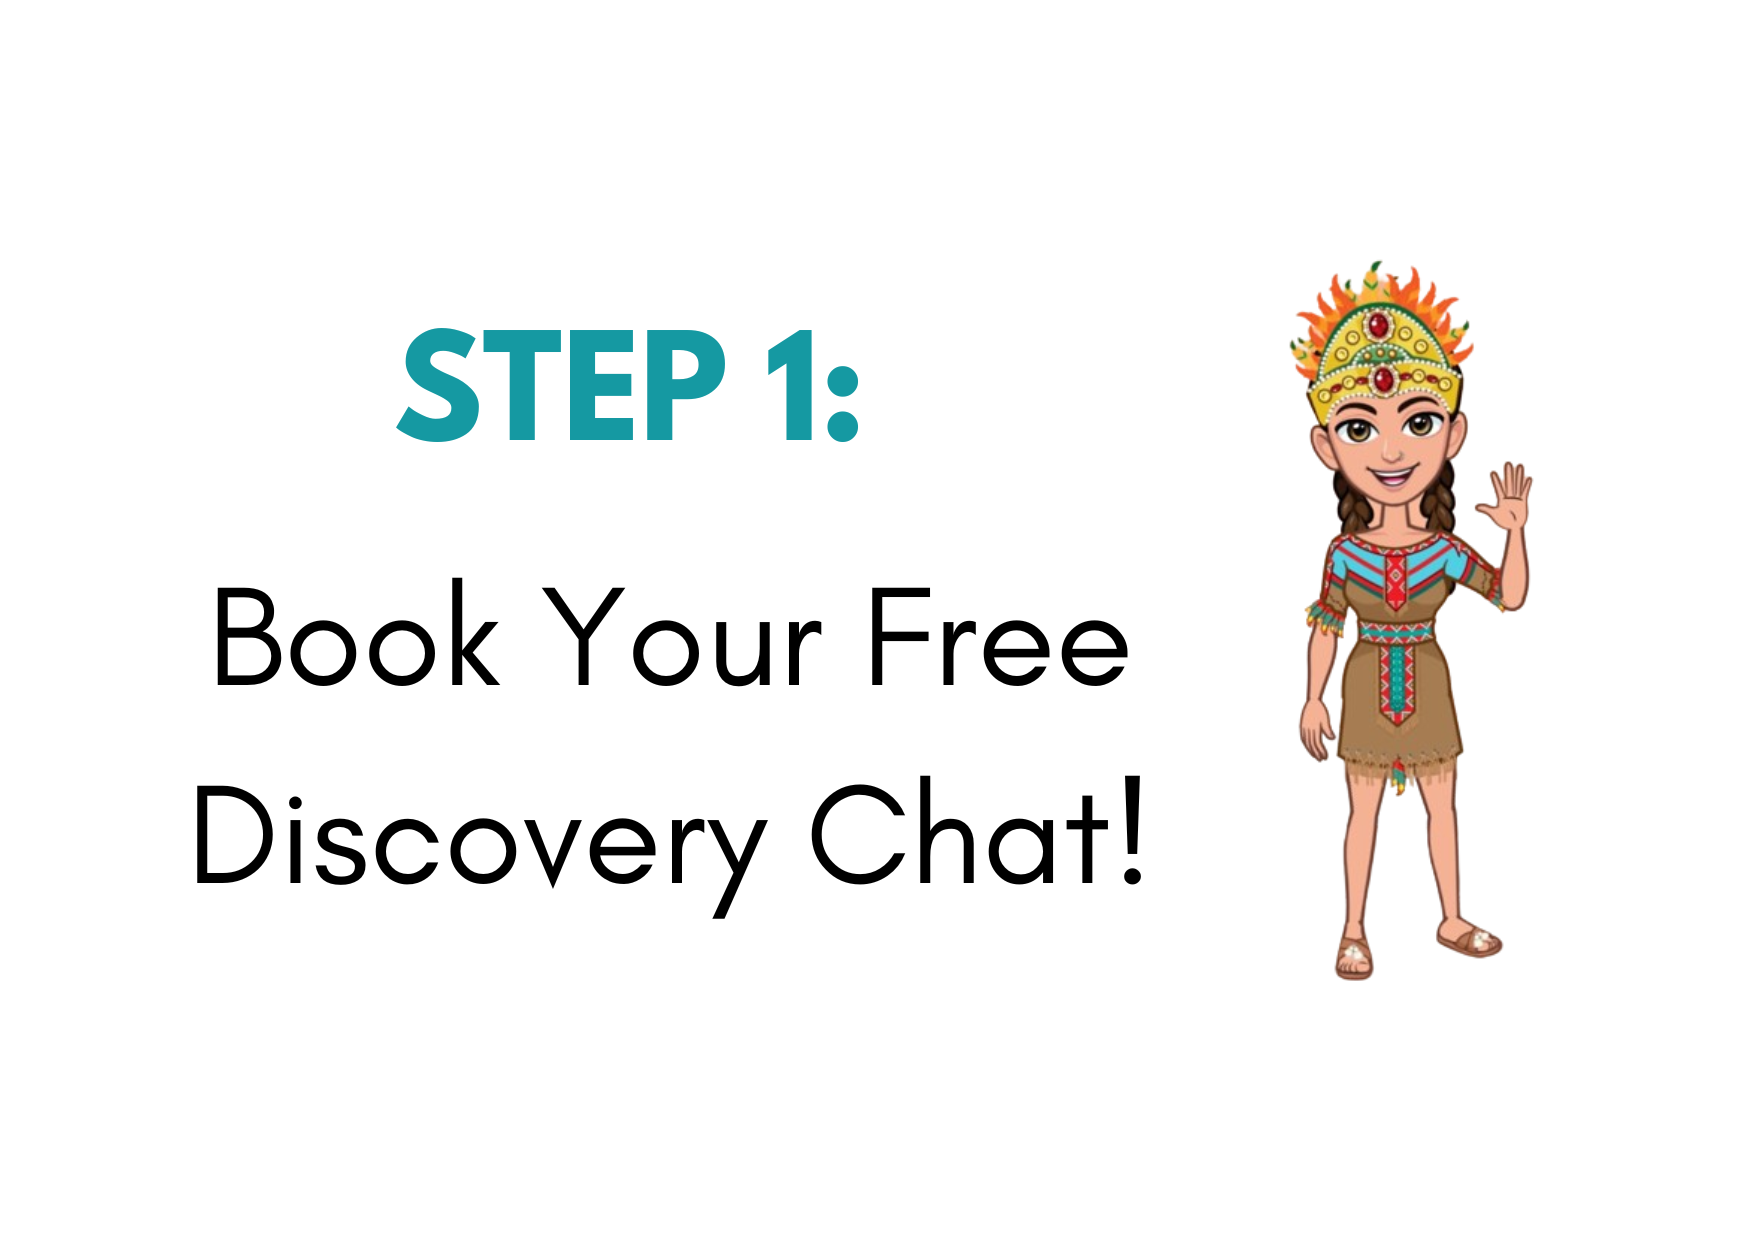 STEP 1 BOOK YOUR DISCOVERY CHAT